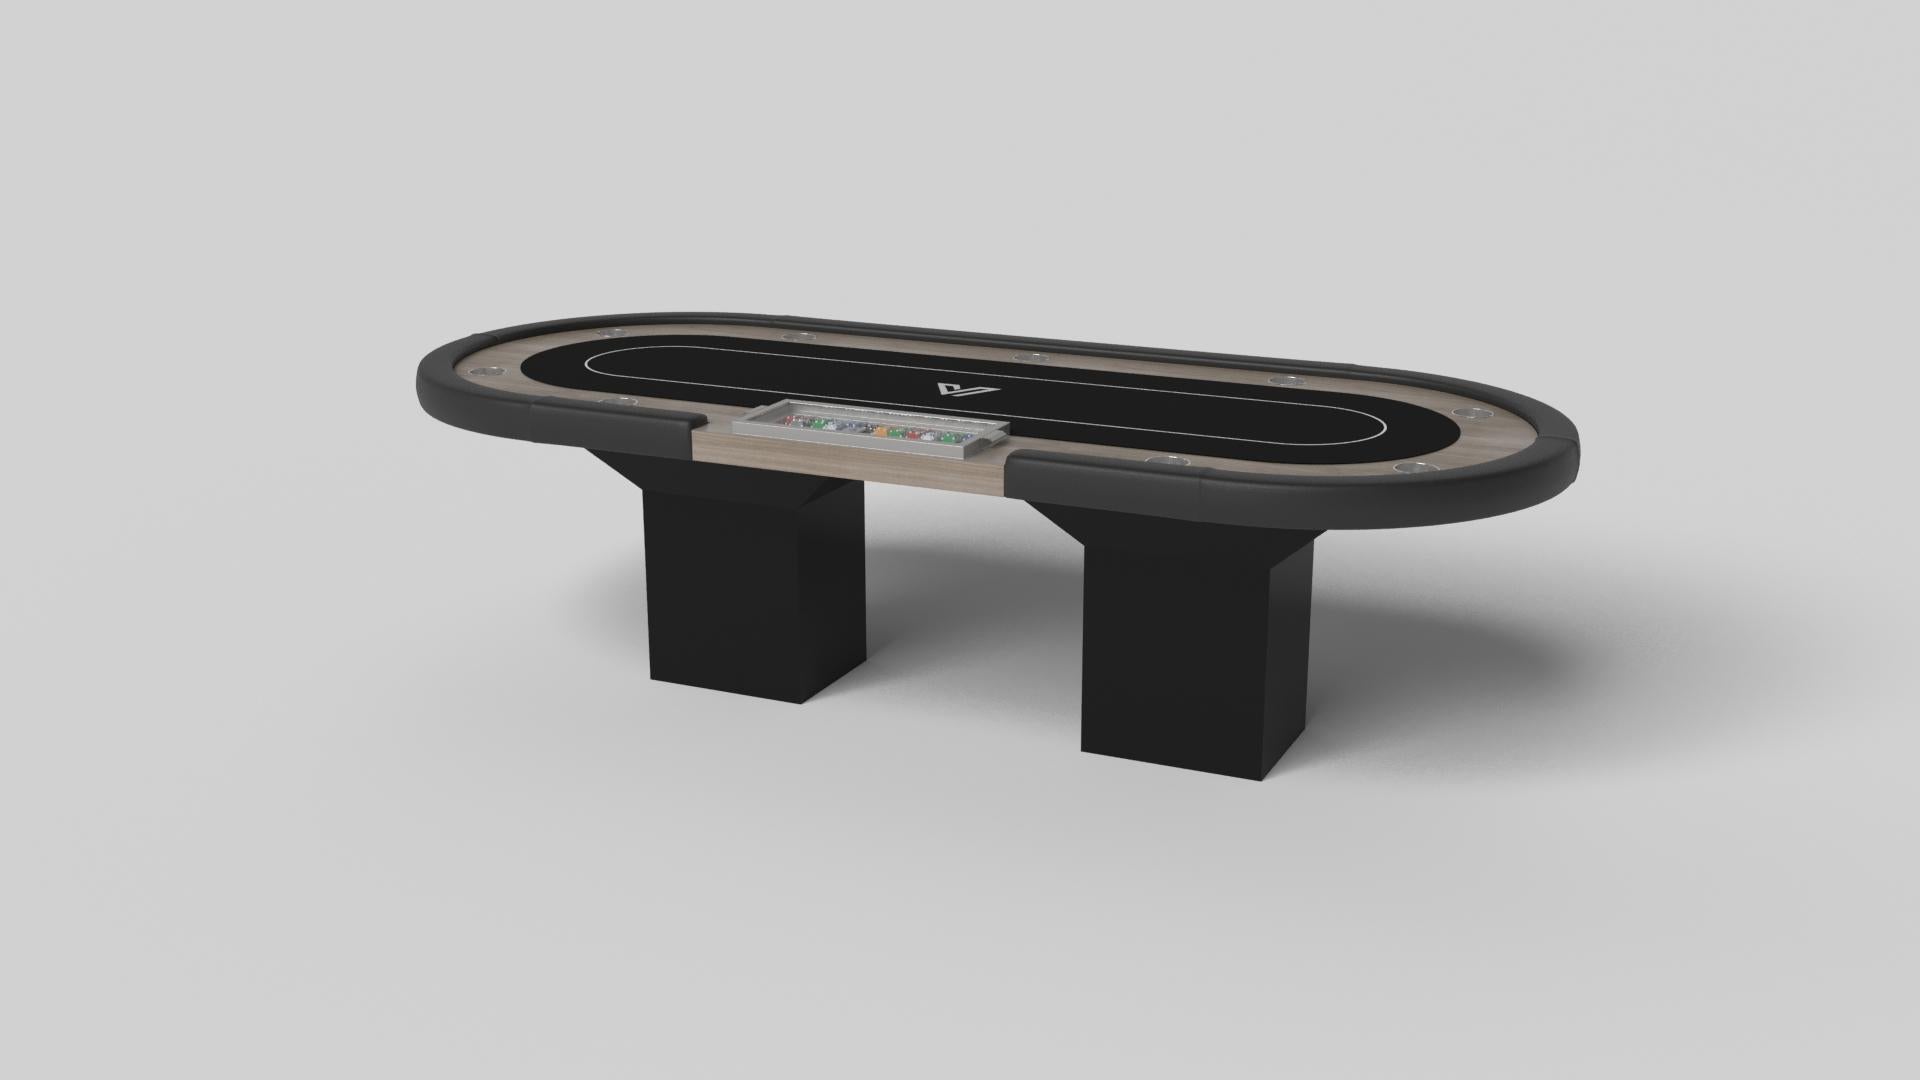 Minimalist design meets opulent elegance in the Trestle poker table. Detailed with a professional surface for endless game play, this contemporary table is expertly crafted. Square block legs give it a stark, geometric look that contributes to its